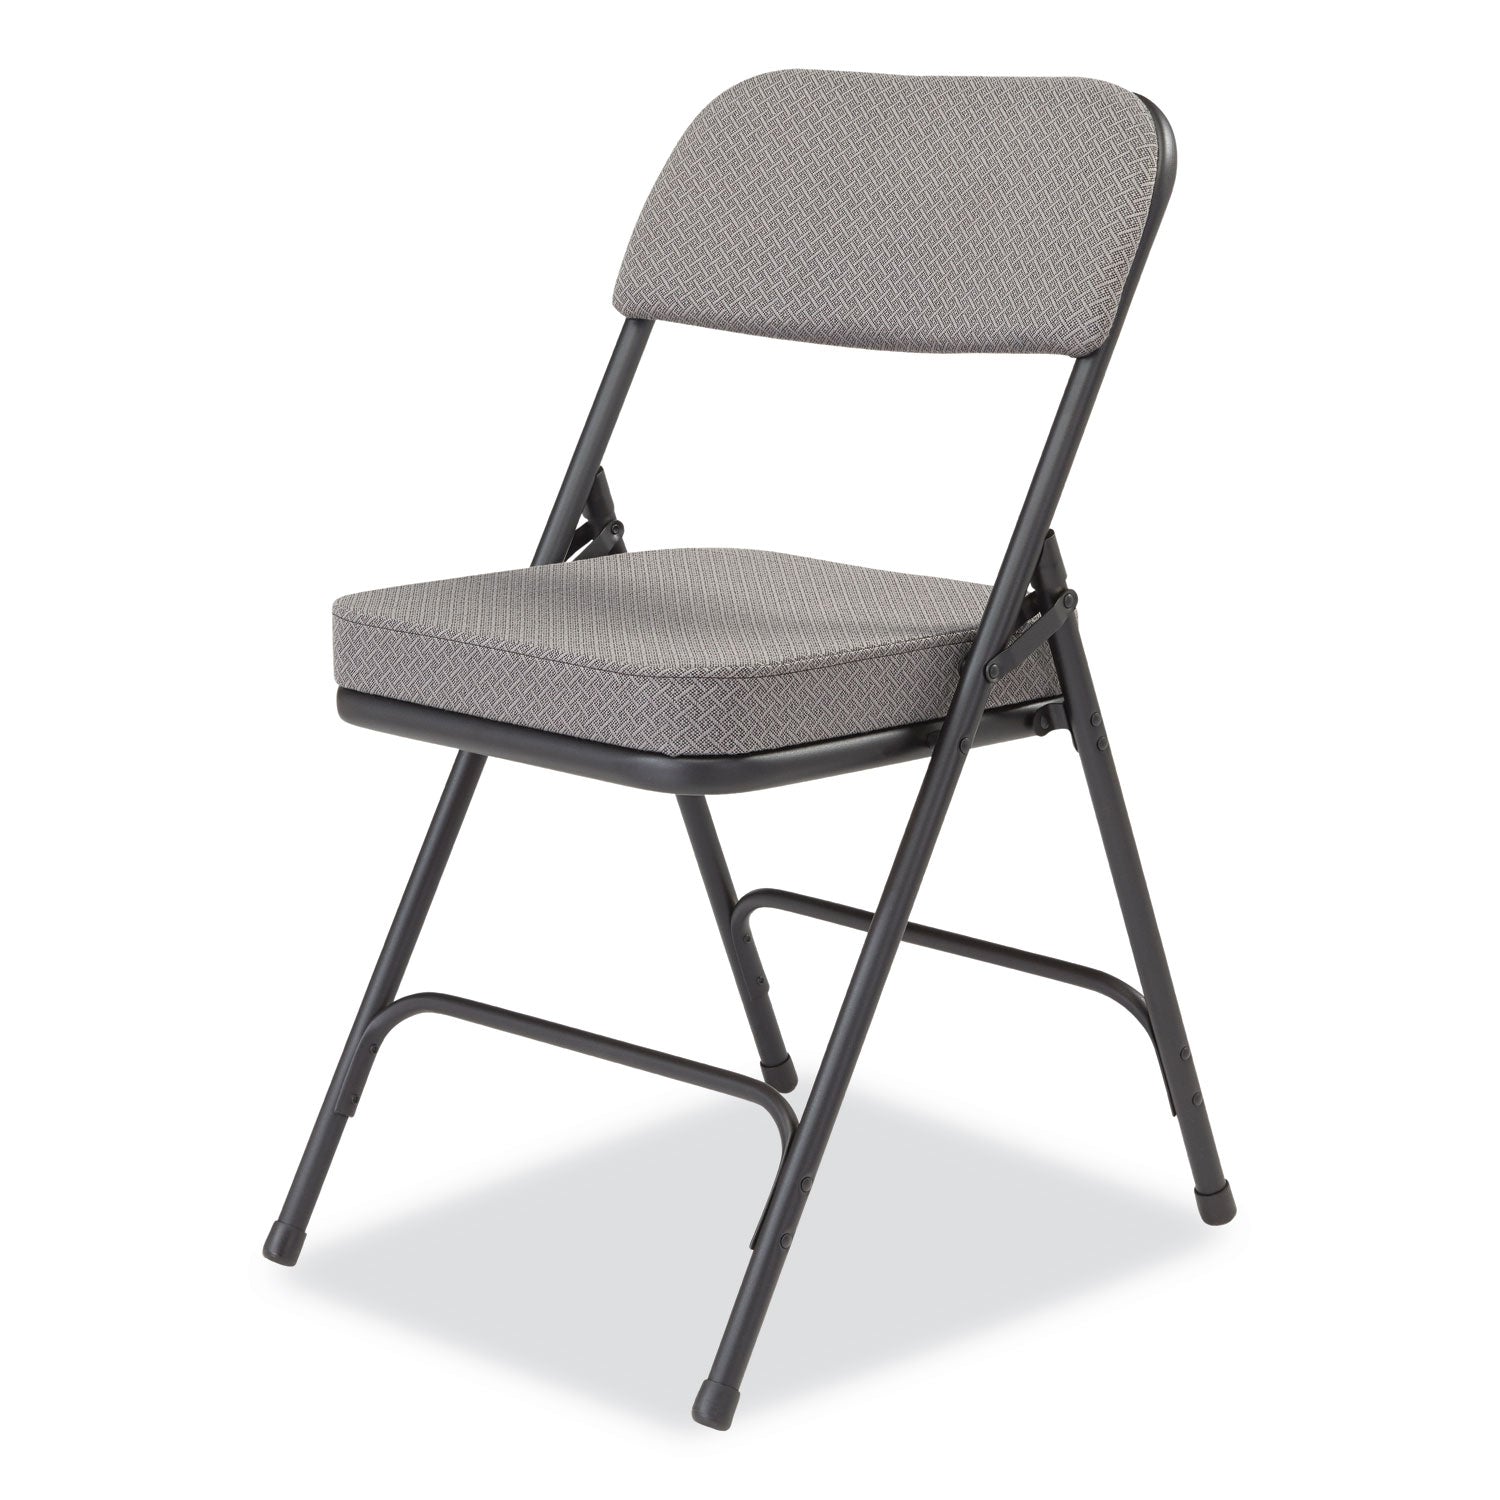 3200-series-fabric-dual-hinge-folding-chair-supports-300-lb-charcoal-seat-back-black-base-2-ct-ships-in-1-3-bus-days_nps3212 - 3